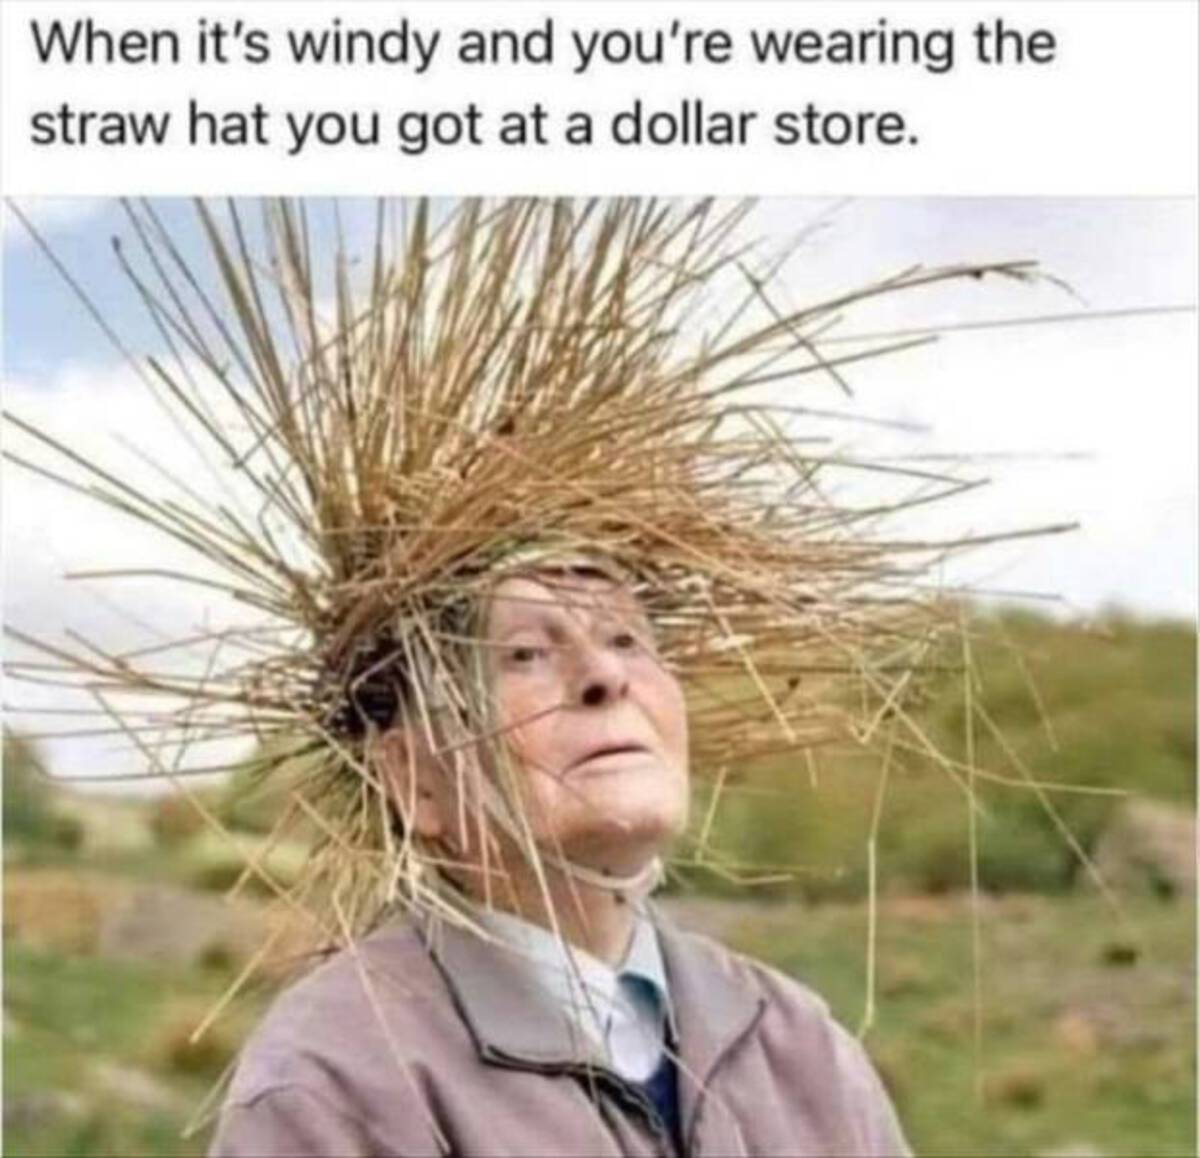 riitta ikonen - When it's windy and you're wearing the straw hat you got at a dollar store.